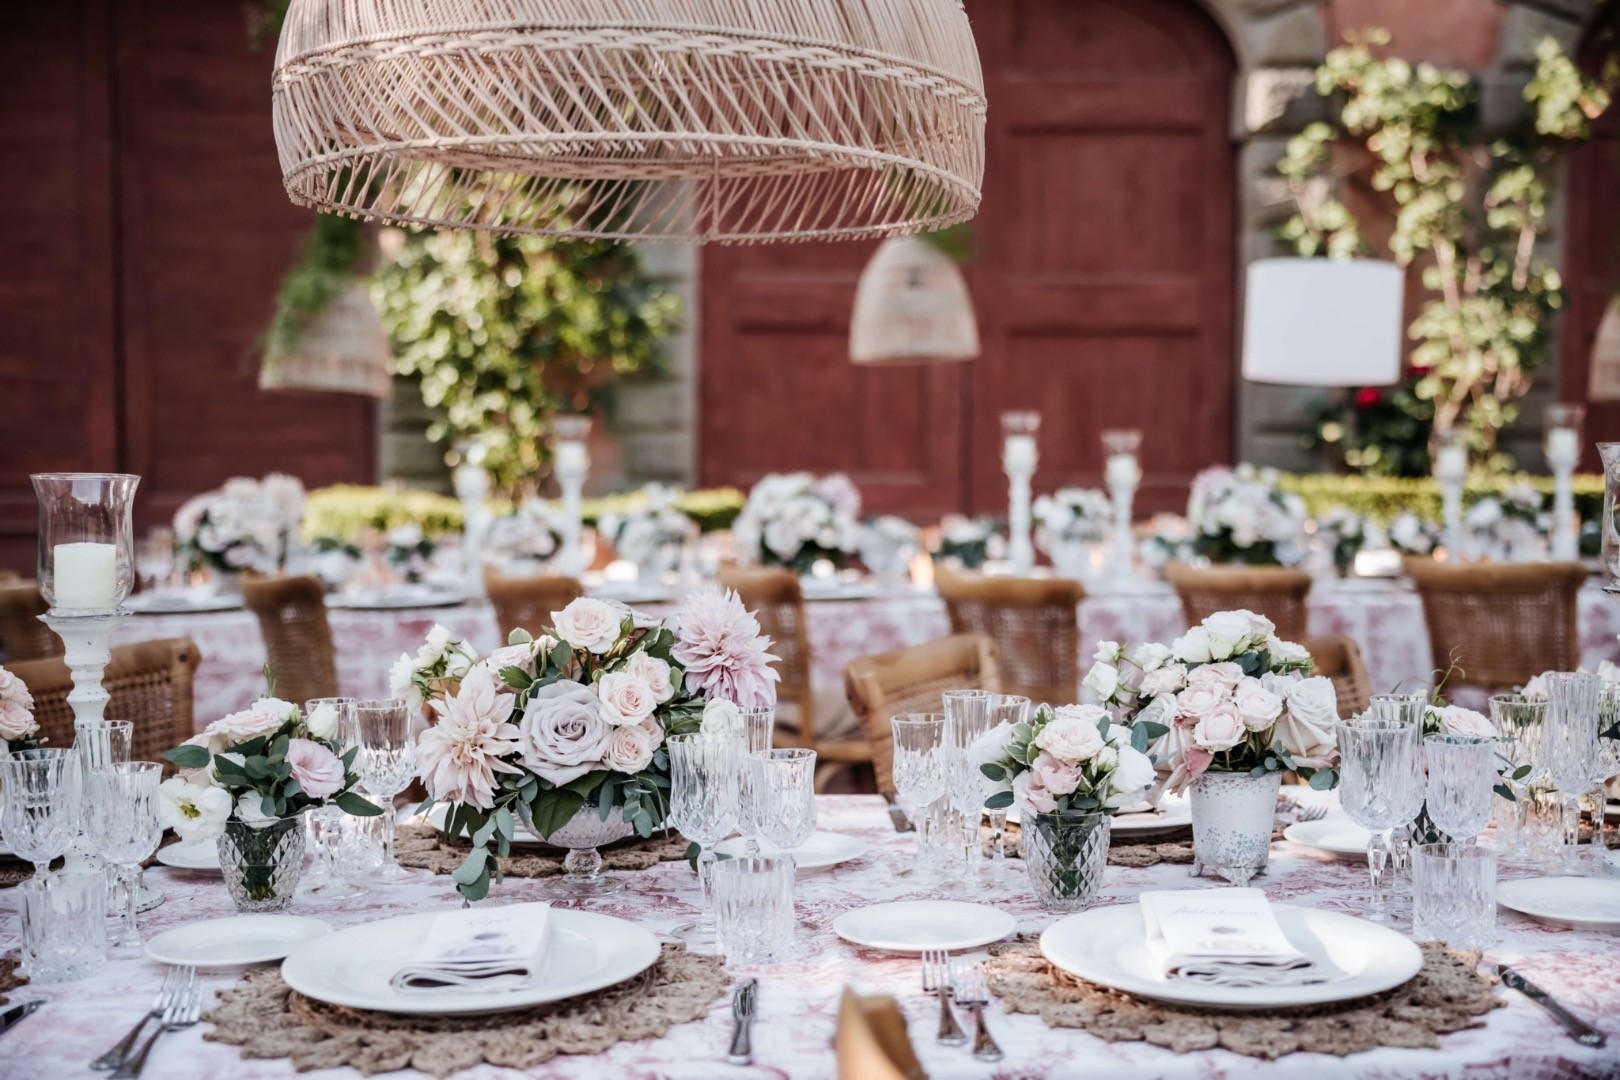 Intimate weddings in Tuscany, a choice of style